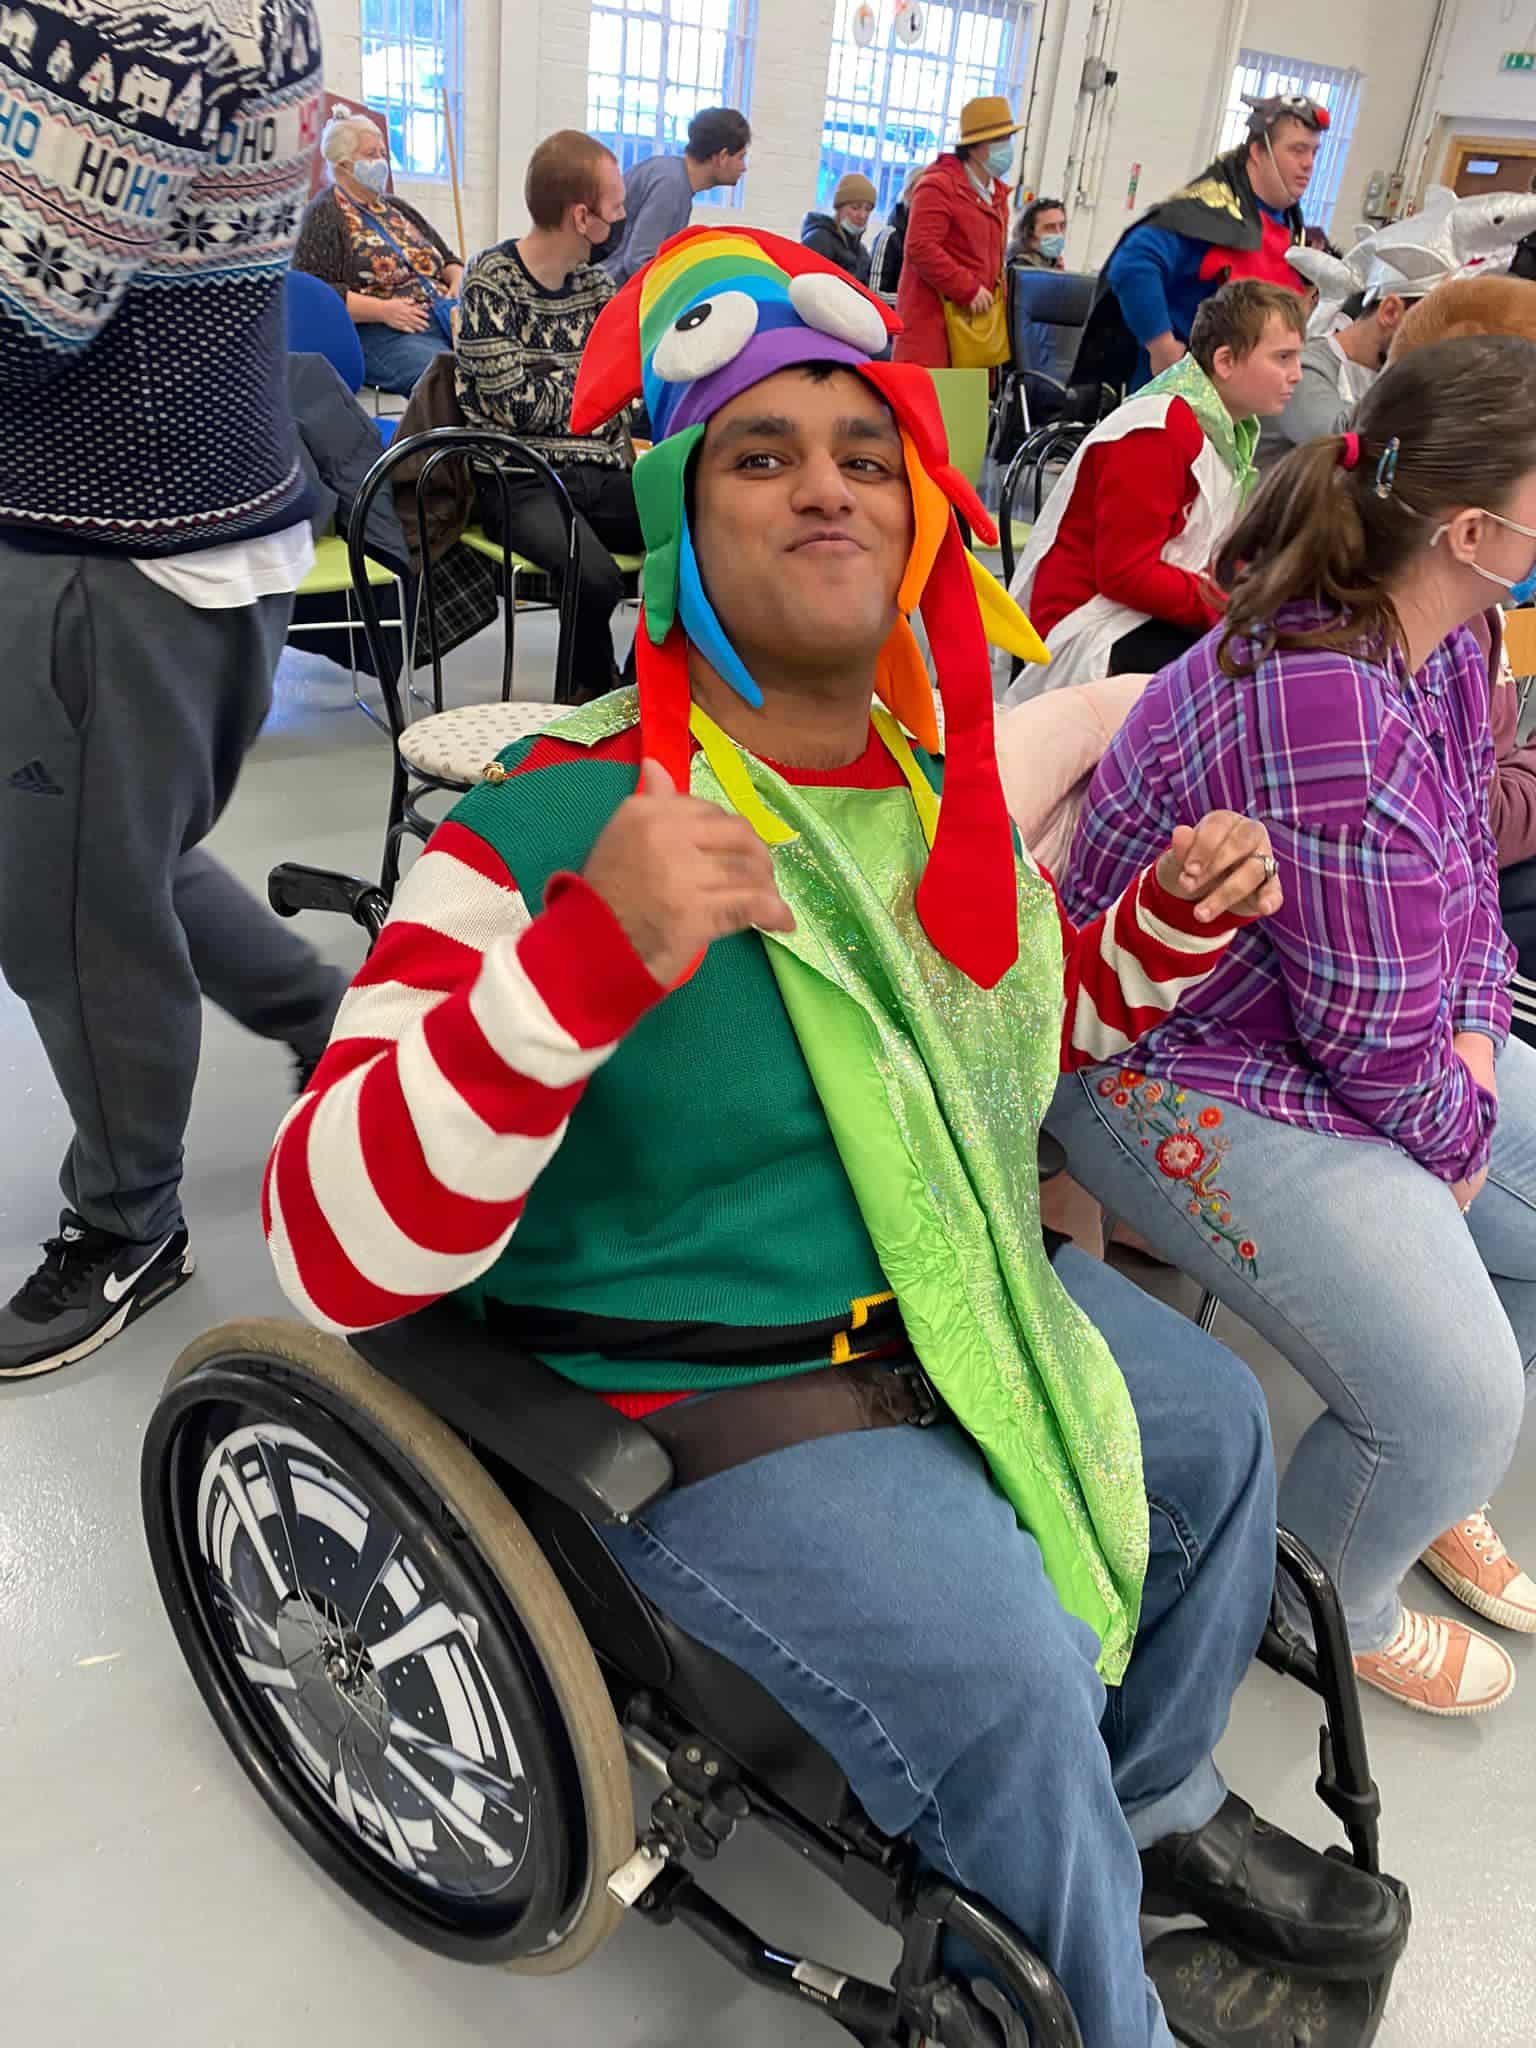 Surrey theatre charity spreads festive cheer to young disabled students in Farnham - Head2Head Sensory Theatre